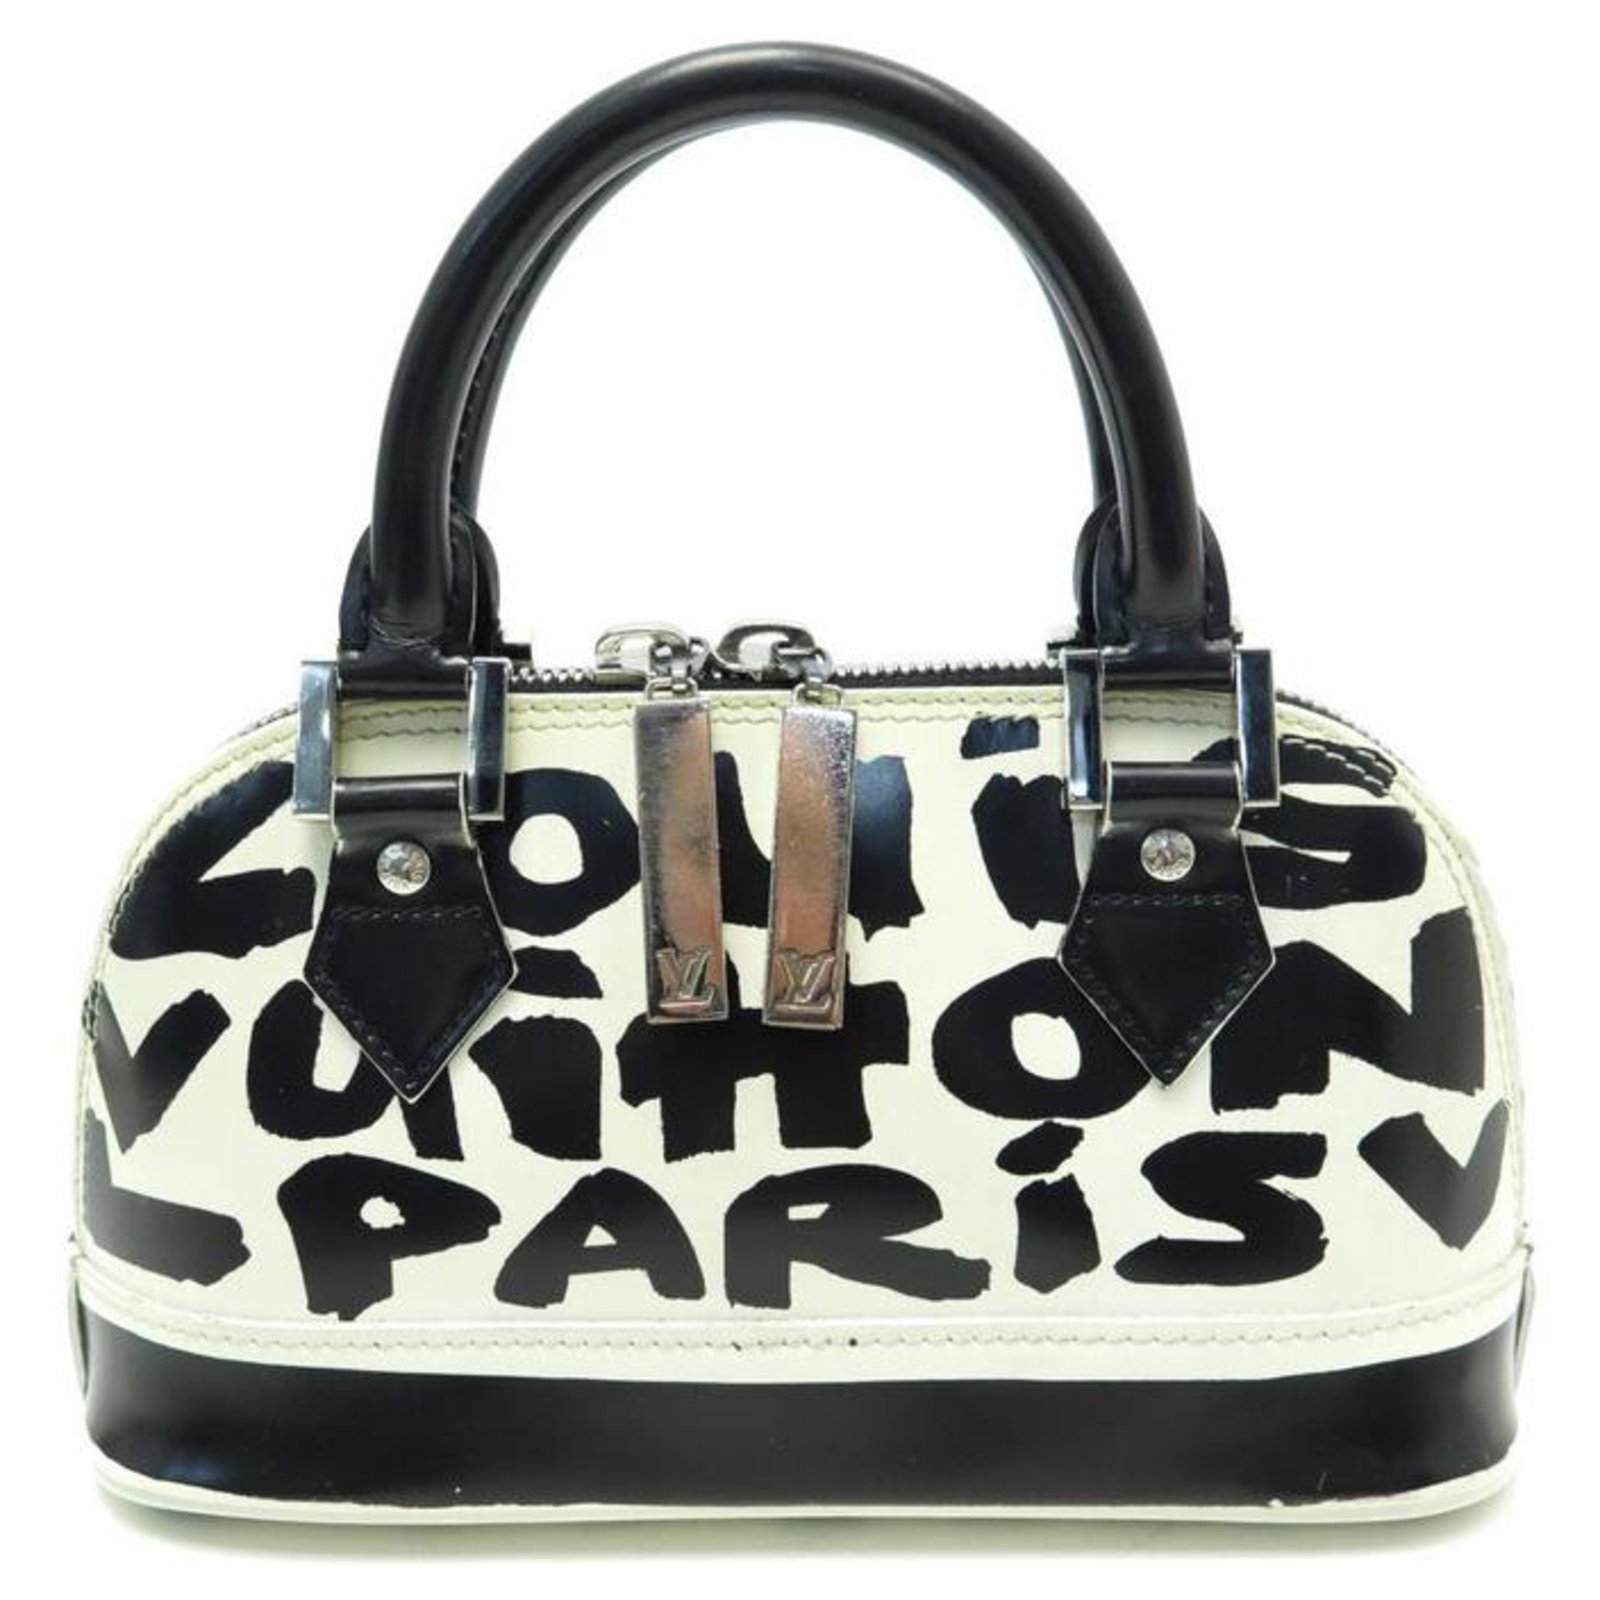 Louis Vuitton Graffiti Alma Limited Edition from the Stephen